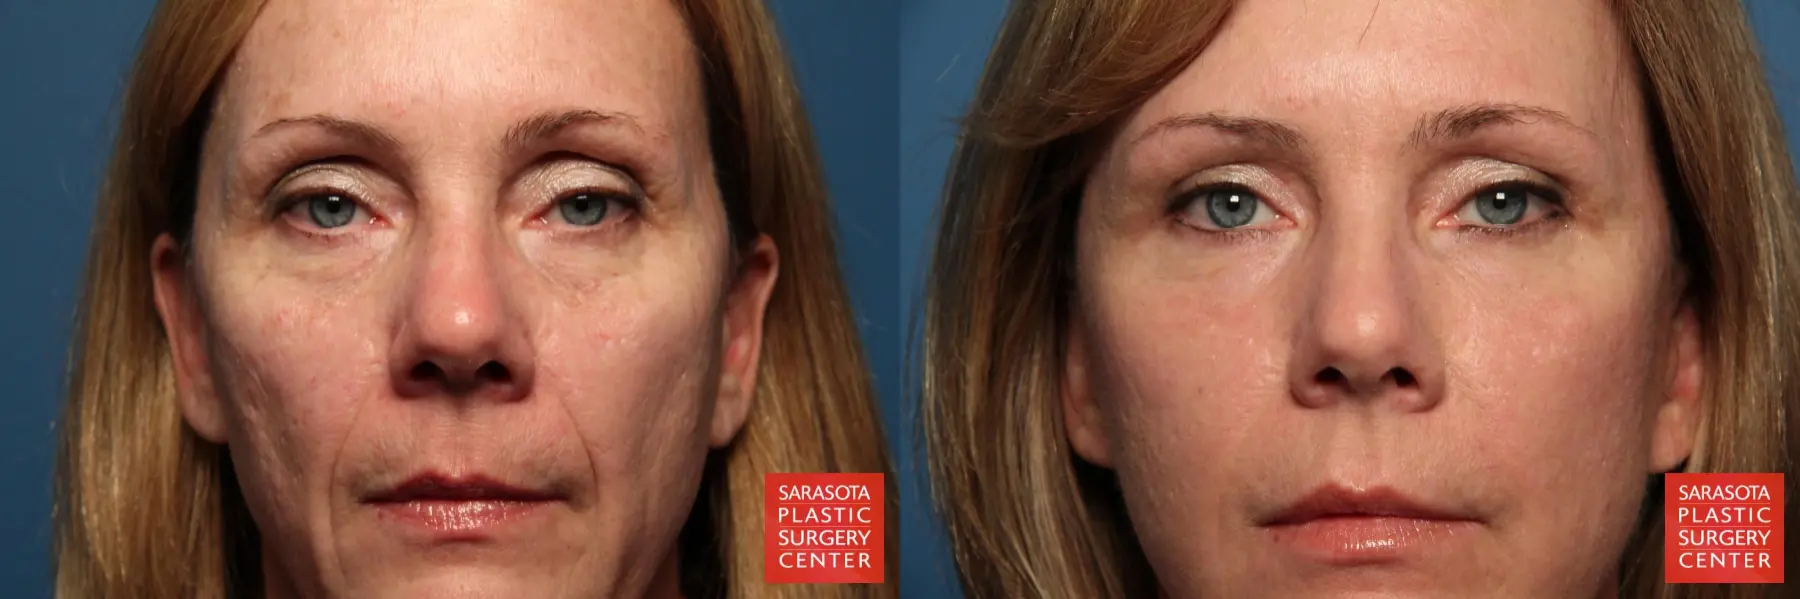 Eyelid Lift: Patient 2 - Before and After  